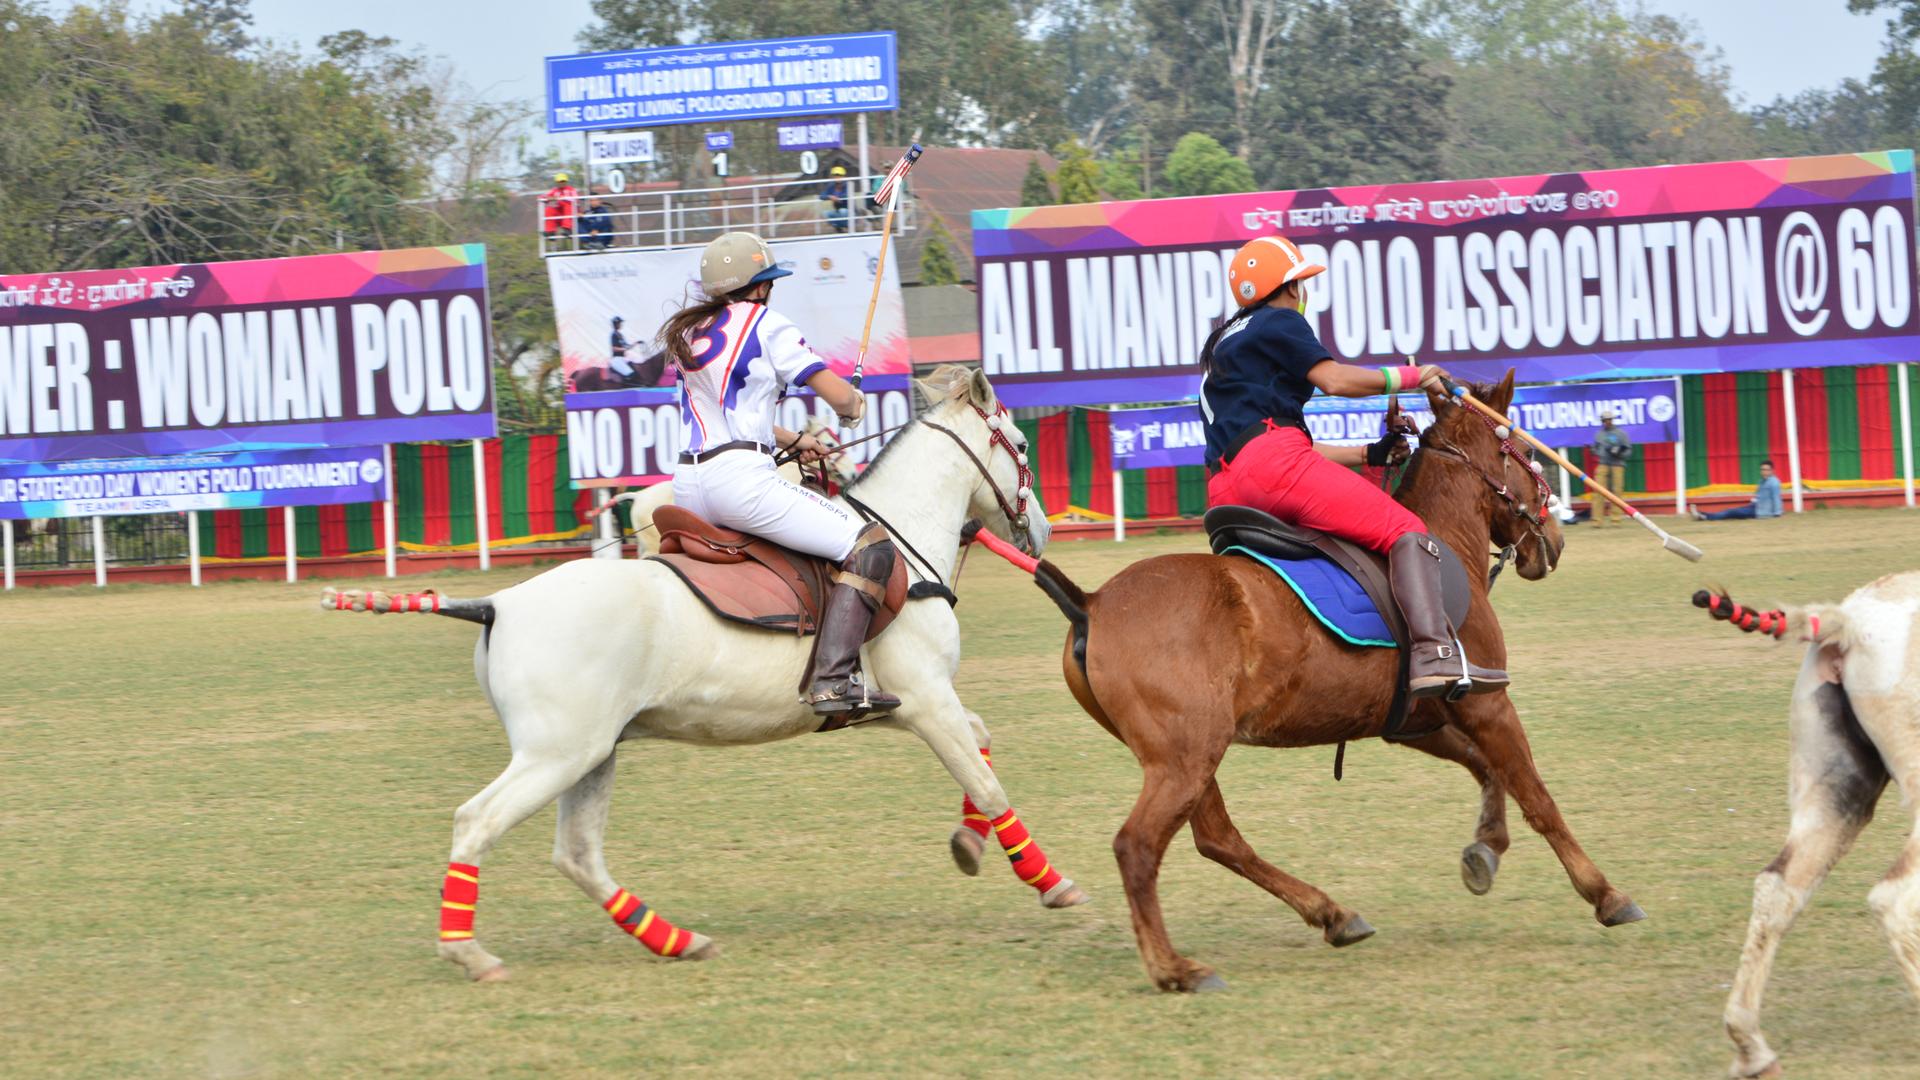 American and Manipuri players particpate in the woman's polo tournament in Manipuri in January 2016. They're riding the native Manipuri ponies.